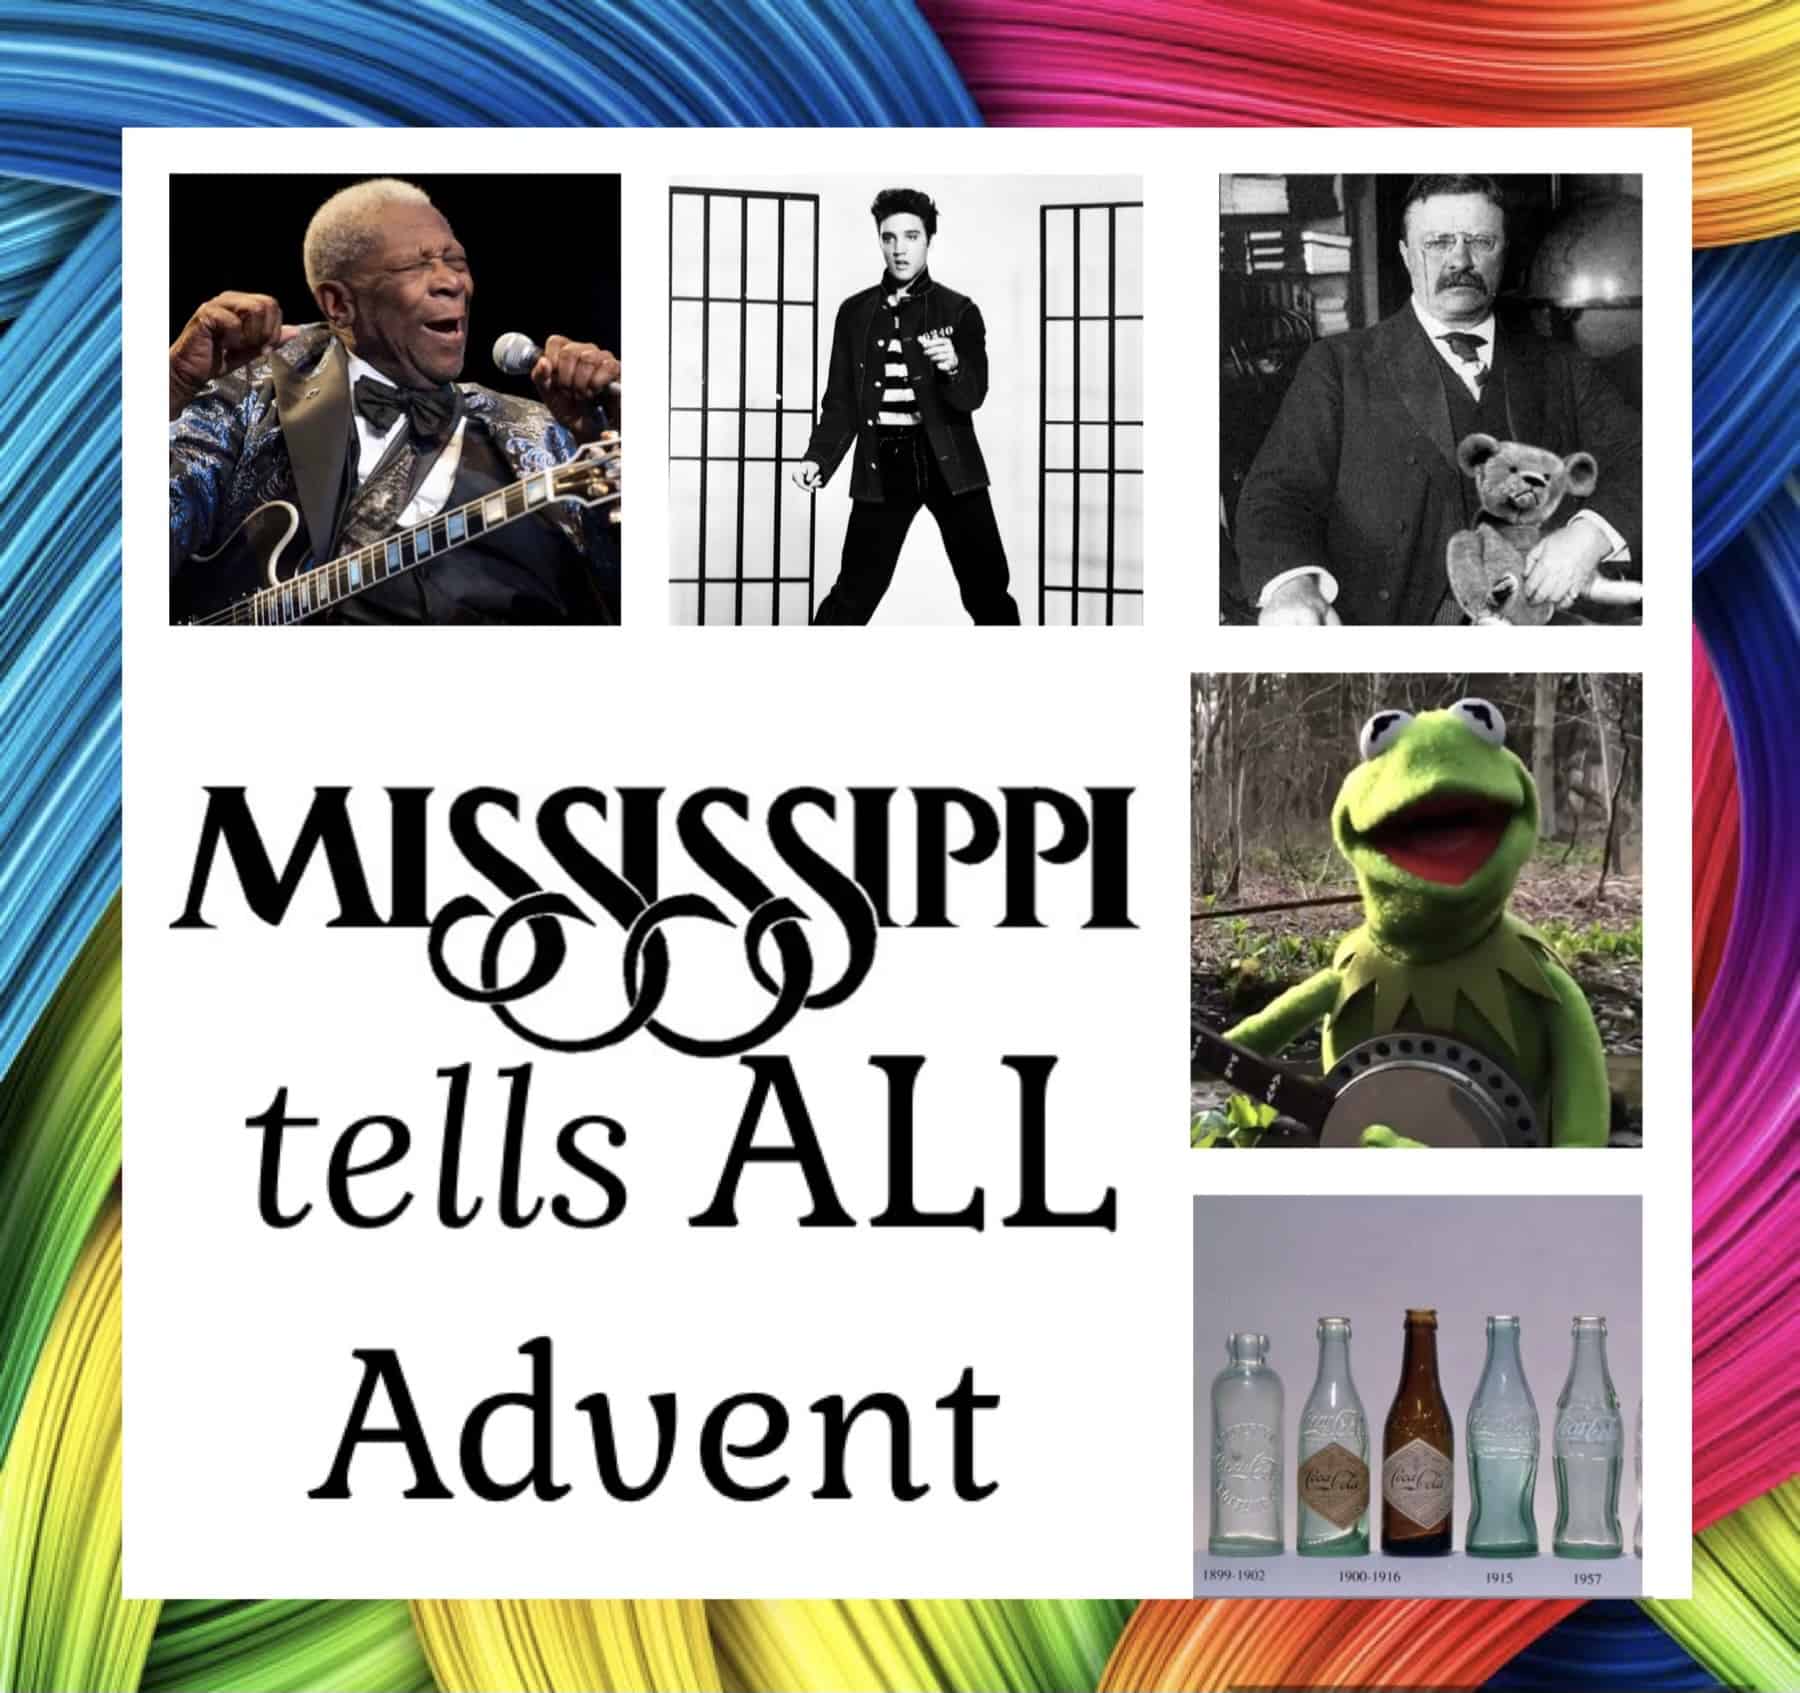 Photos of BB King, Elvis Presley. Teddy Roosevelt, Kermit the Frog and Coca Cola bottles with a multicolor yarn background and the text Mississippi Tells All Advent.